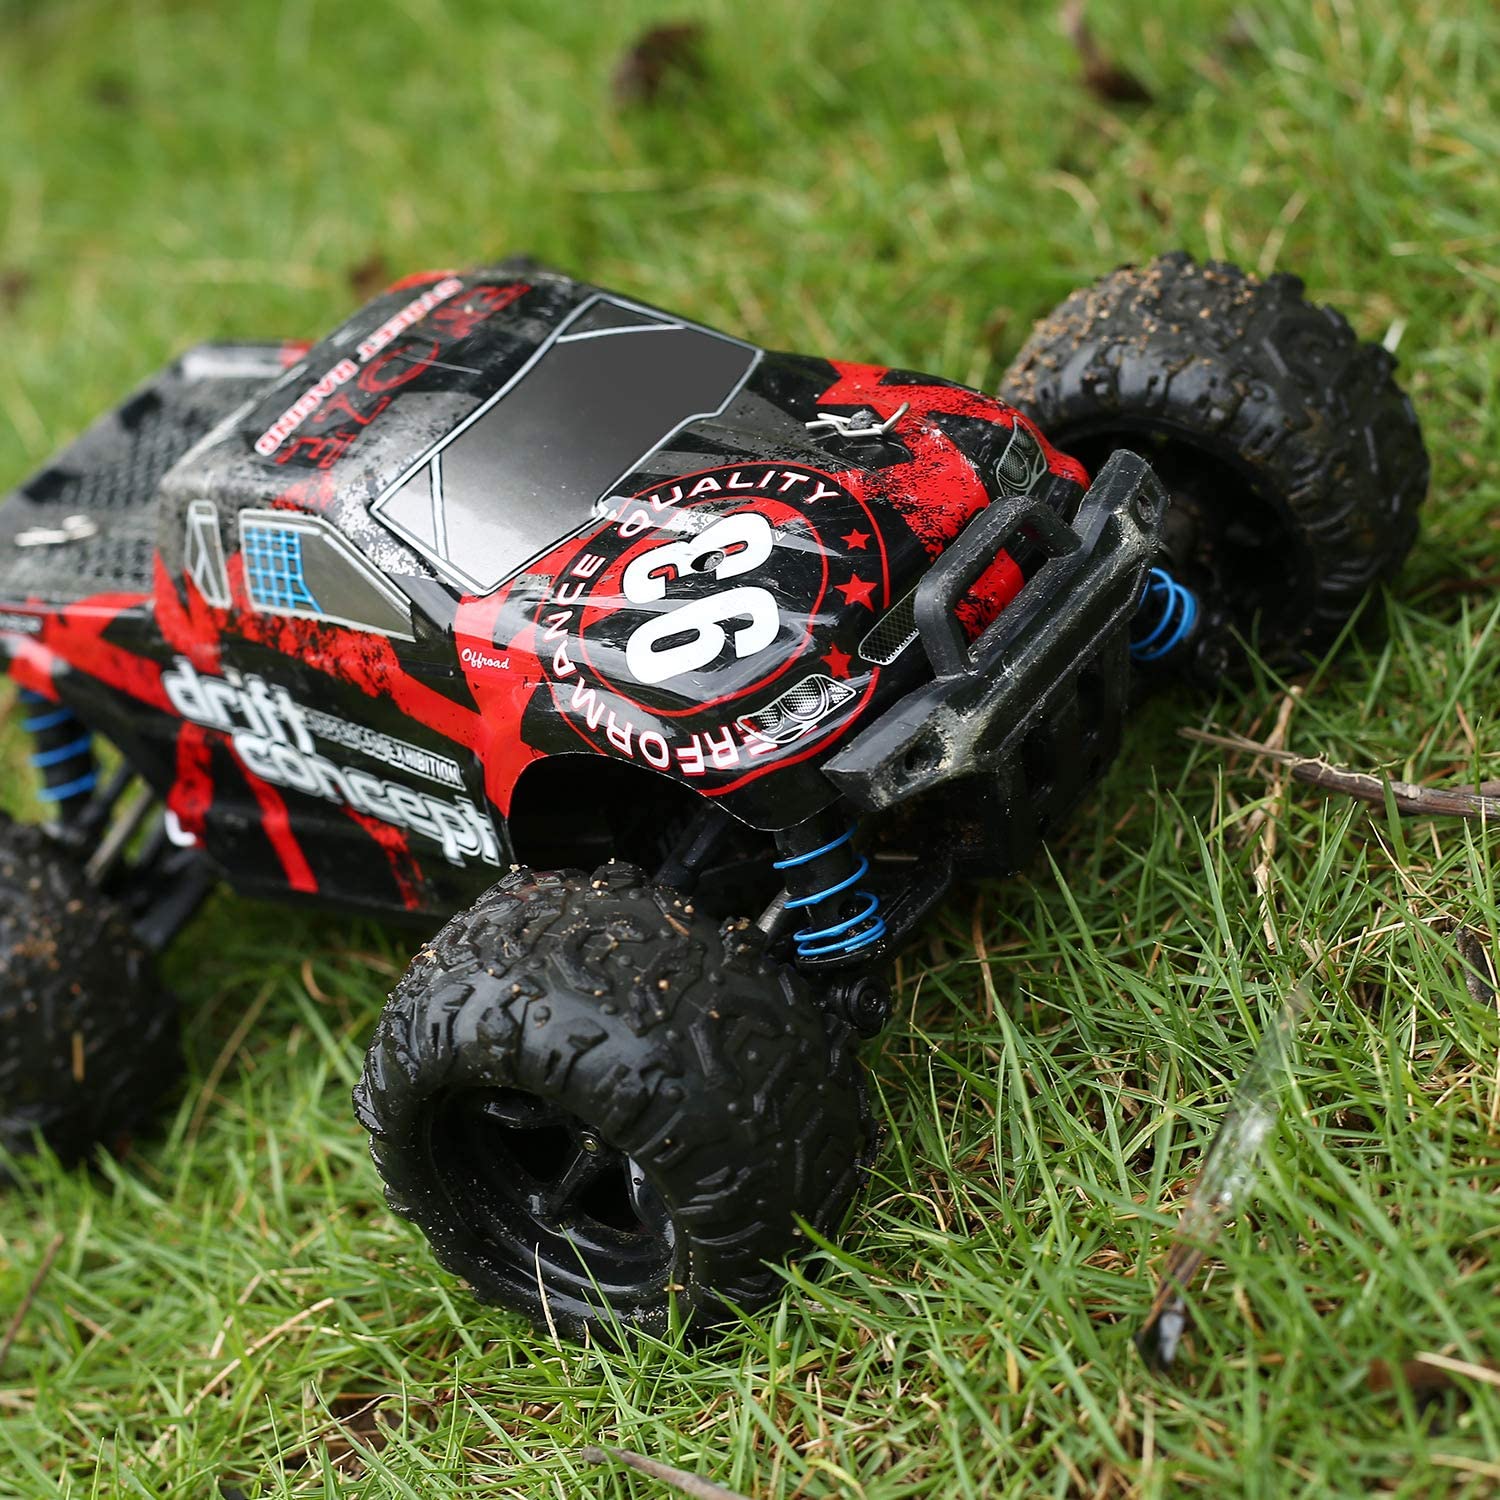 DEERC 300E RC Car High Speed Remote Control Car 1:18 Scale 4WD Monster Truck